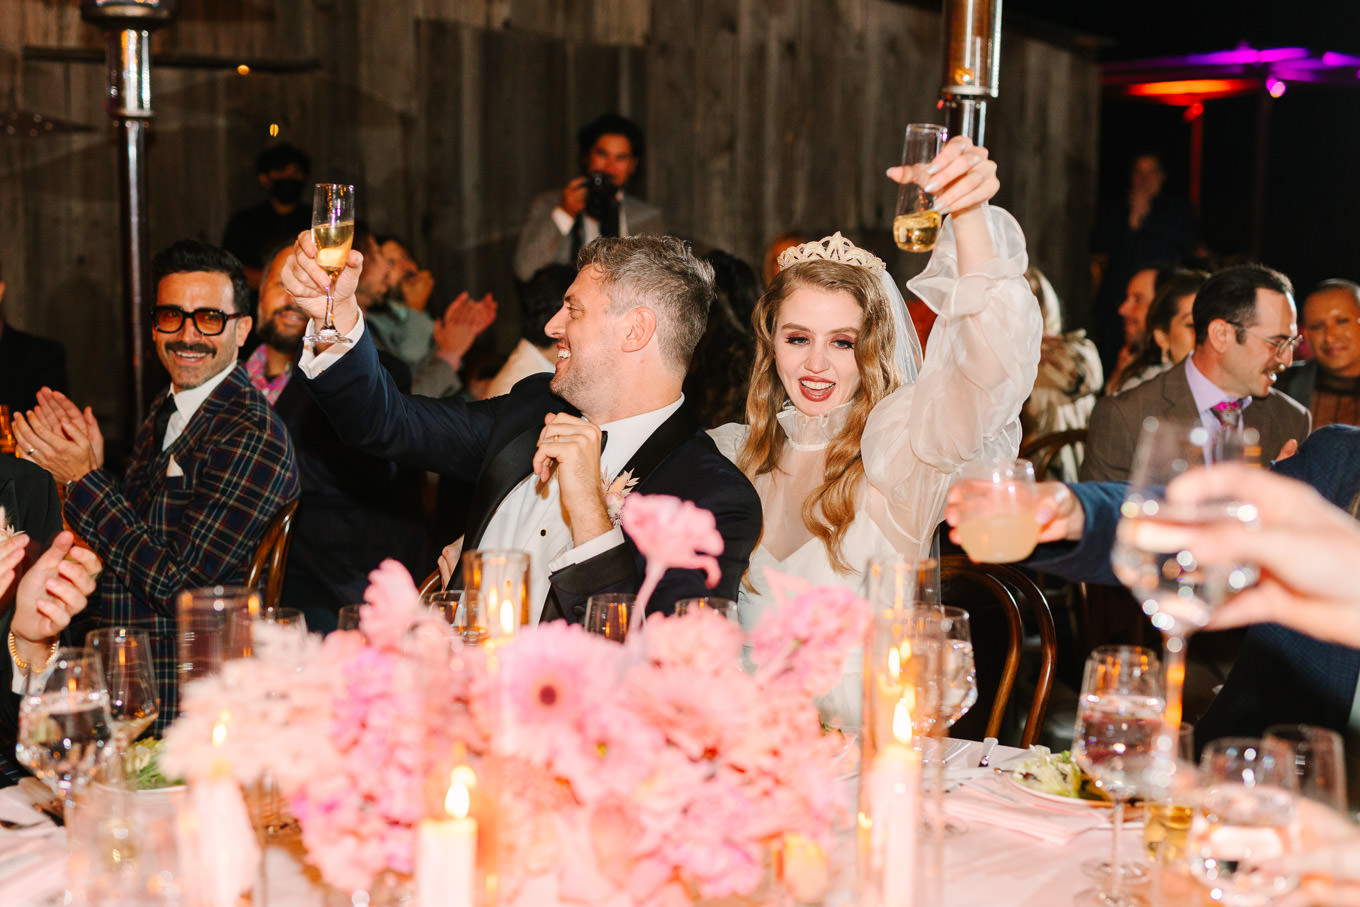 Bride and groom toasting at wedding Monochromatic pastel wedding tables | Colorful and quirky wedding at Higuera Ranch in San Luis Obispo | #sanluisobispowedding #californiawedding #higueraranch #madonnainn   
Source: Mary Costa Photography | Los Angeles